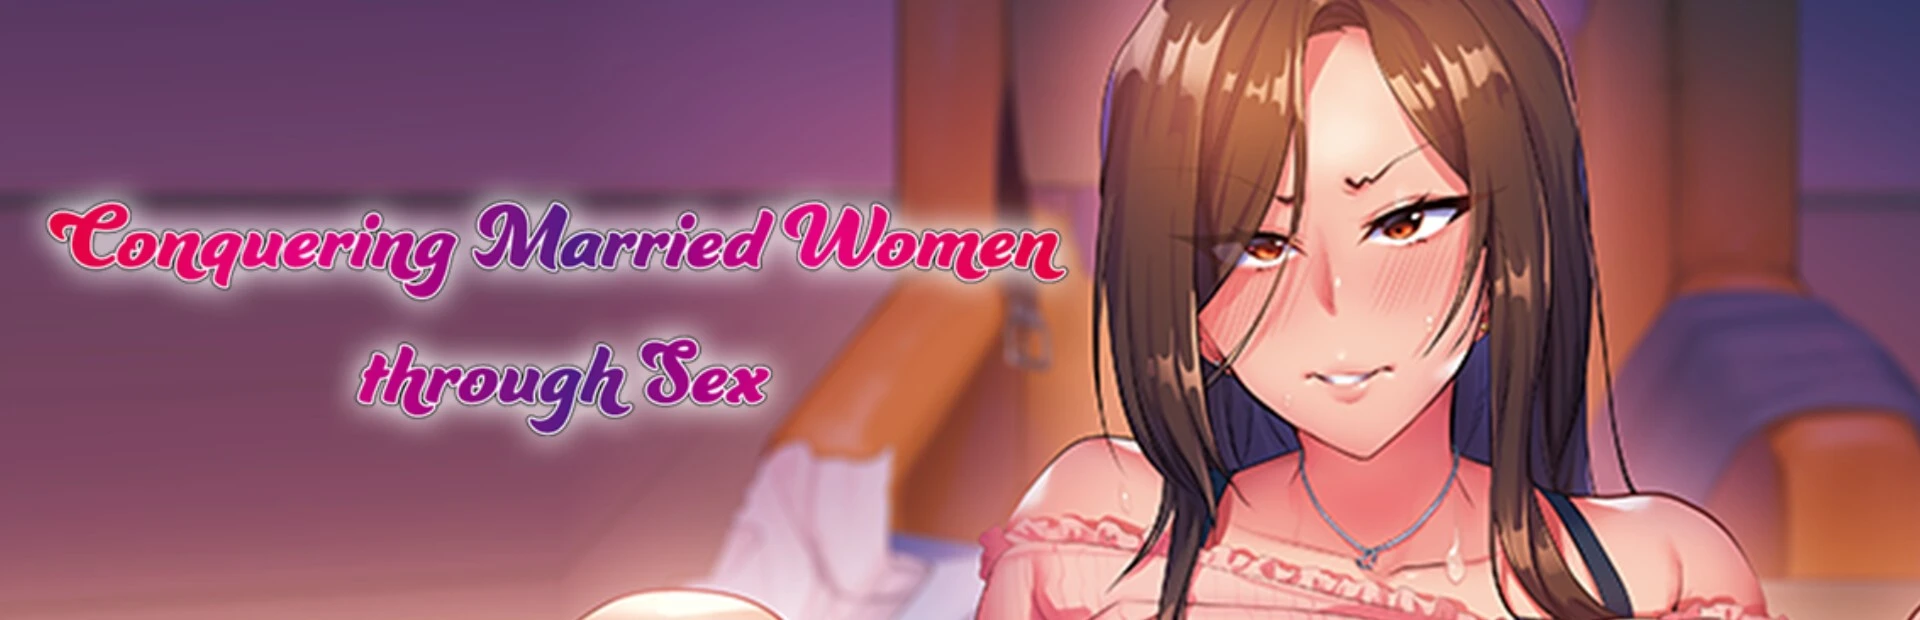 Conquering Married Women through Sex main image